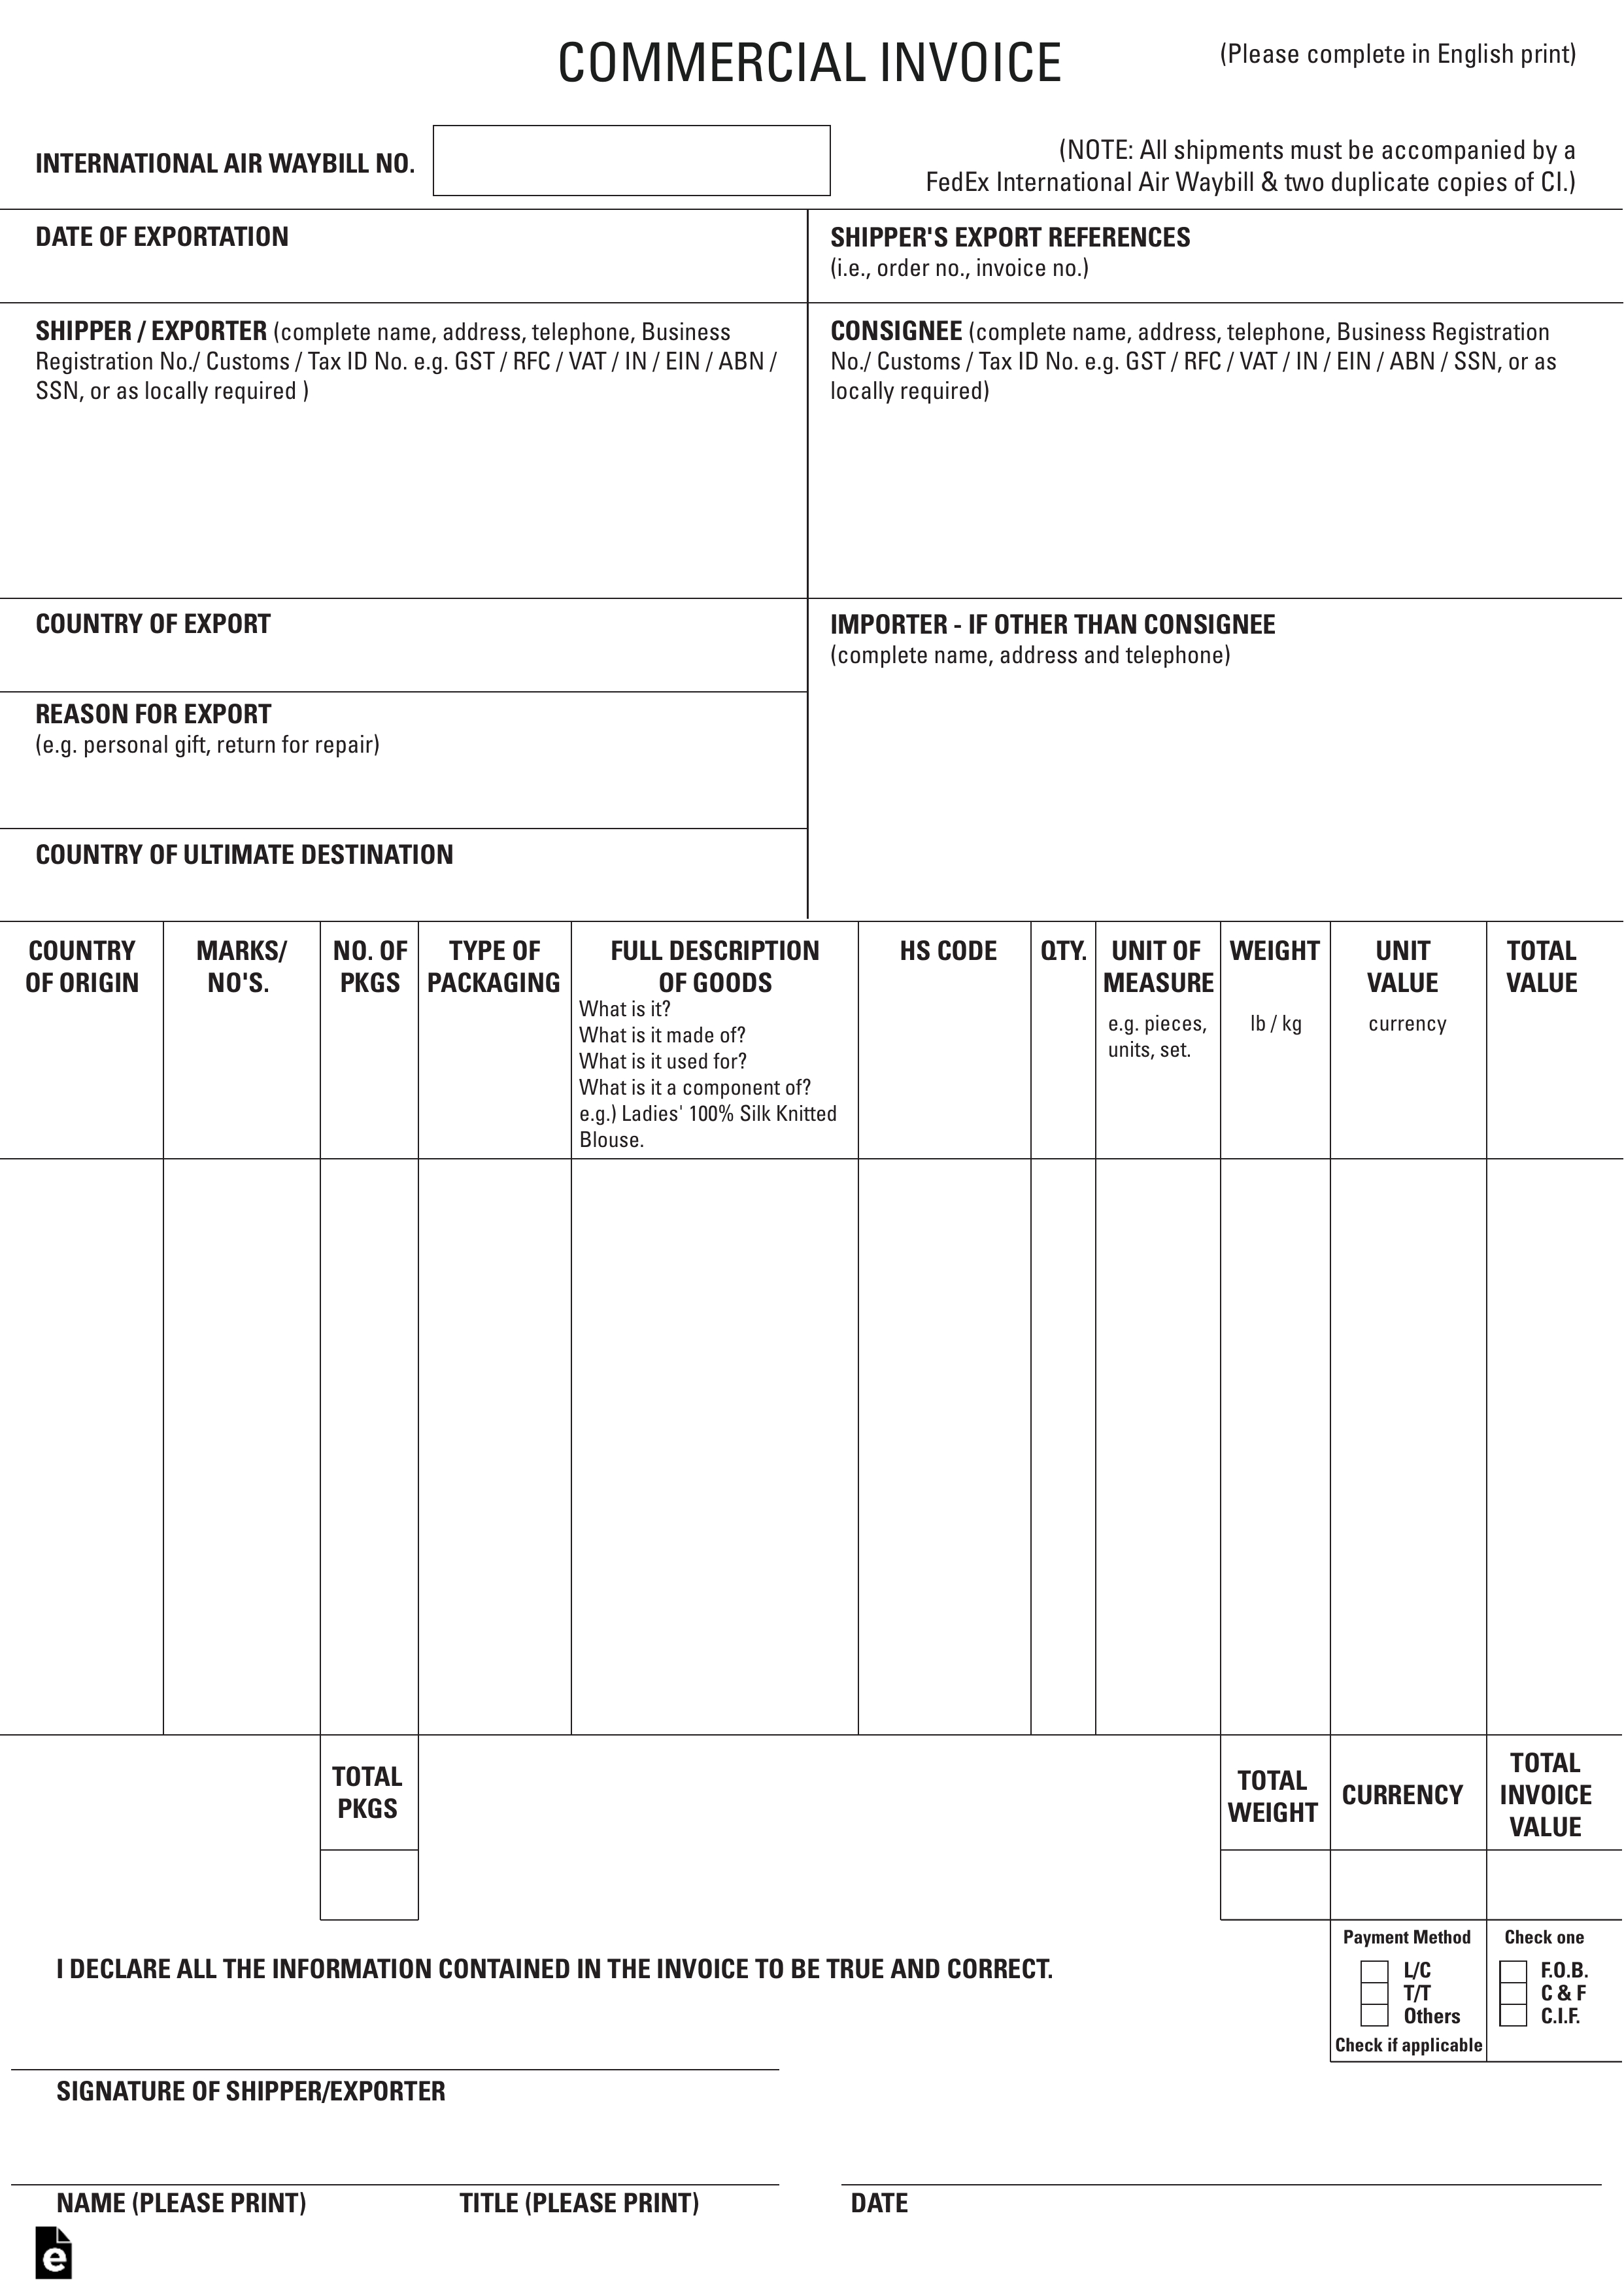 commercial invoice export template